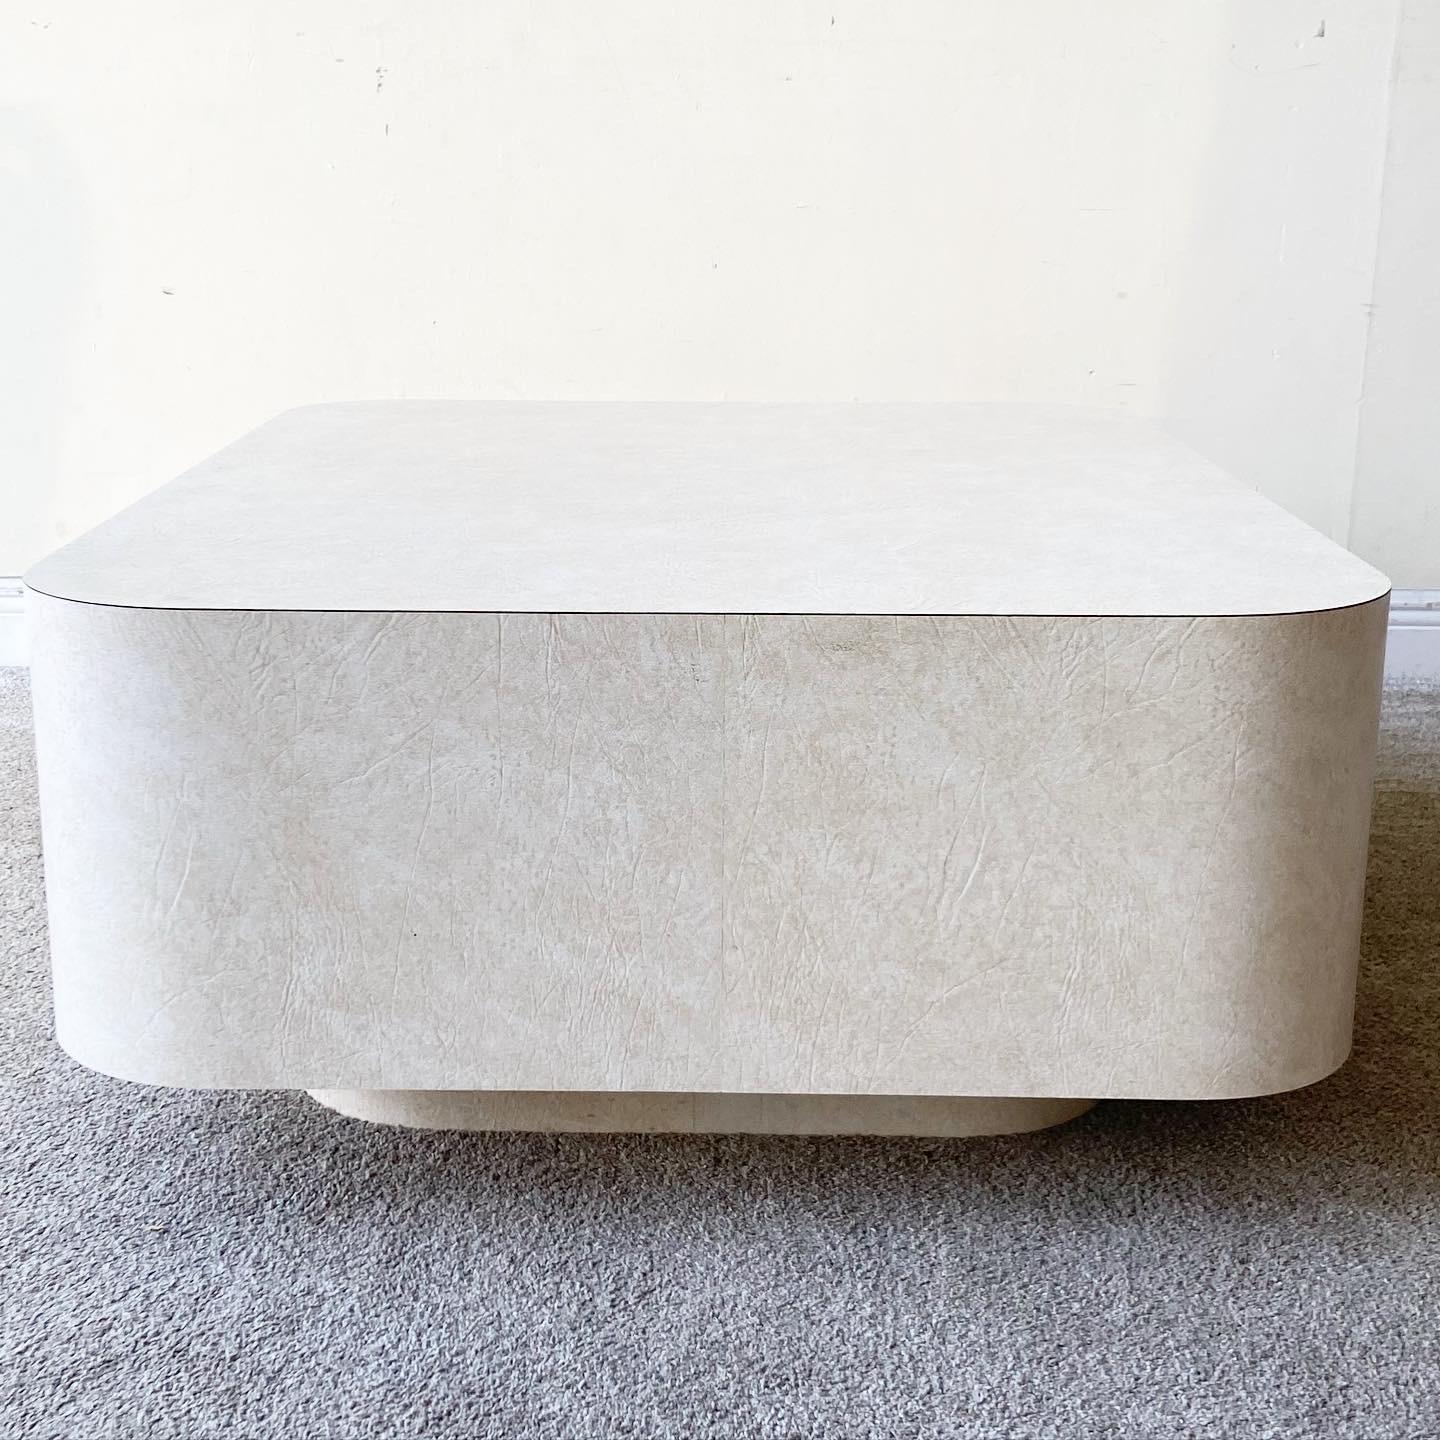 American Postmodern Faux Goatskin Vinyl Laminate Coffee Table with 2 Drawers, 1980s